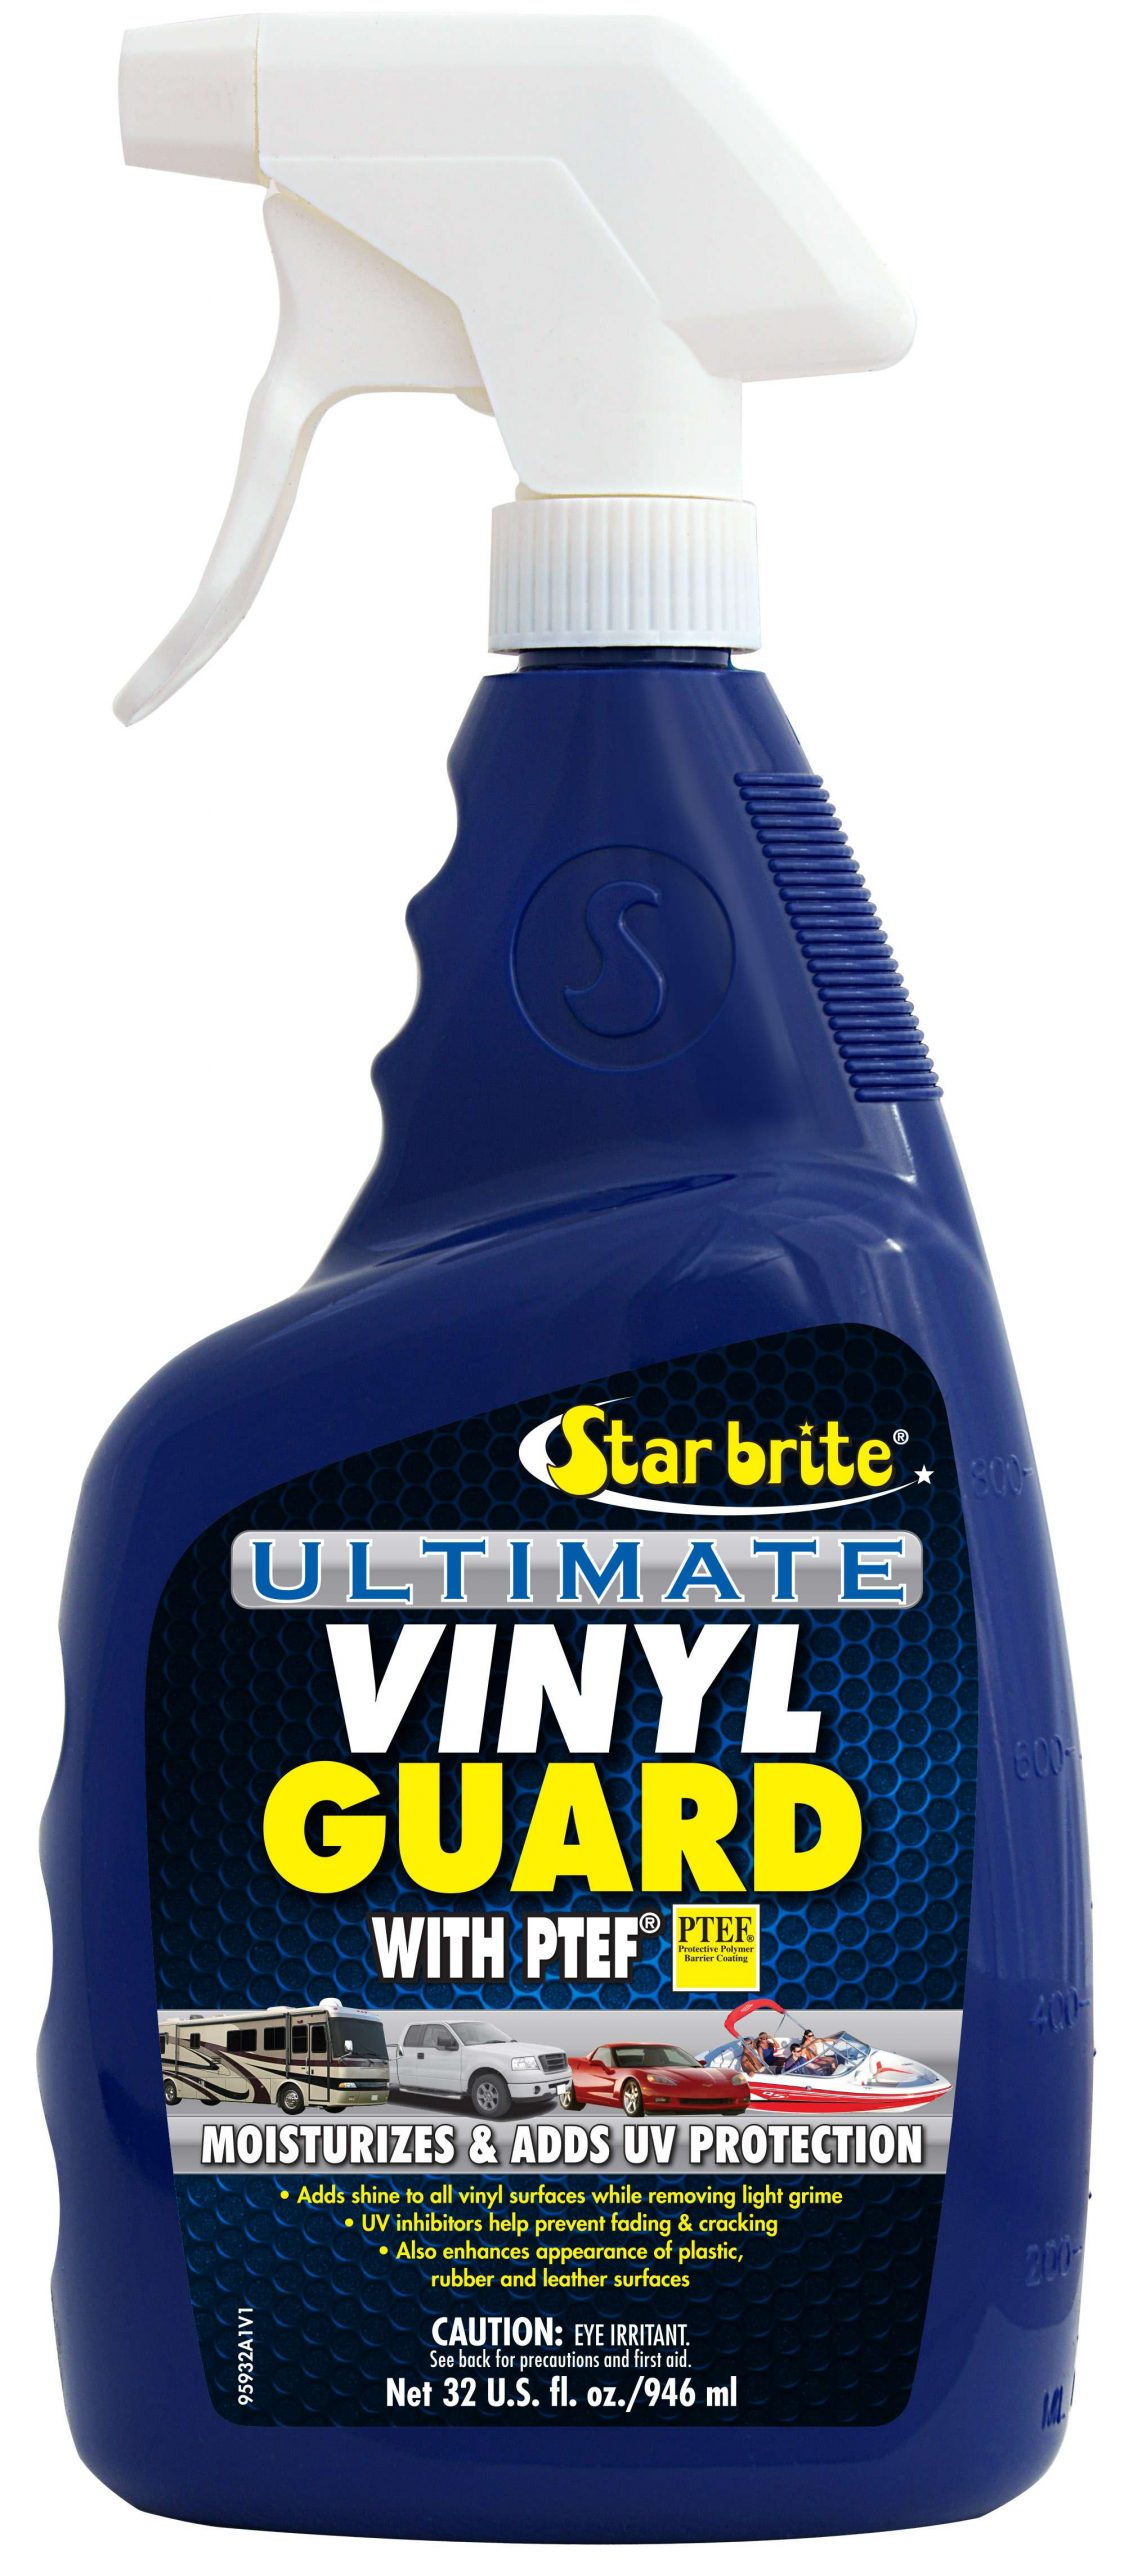 <p><b>Star brite</b><br />
	ULTIMATE Vinyl Guard<br />
	Star brites' new Guard products are designed to protect your boat, by people who use boats. It can be sprayed on all vinyl, plastic, rubber and leather surfaces to enhance the appearance while providing real protection against the ravages of sunlight, salt water and normal wear and tear.</p>
